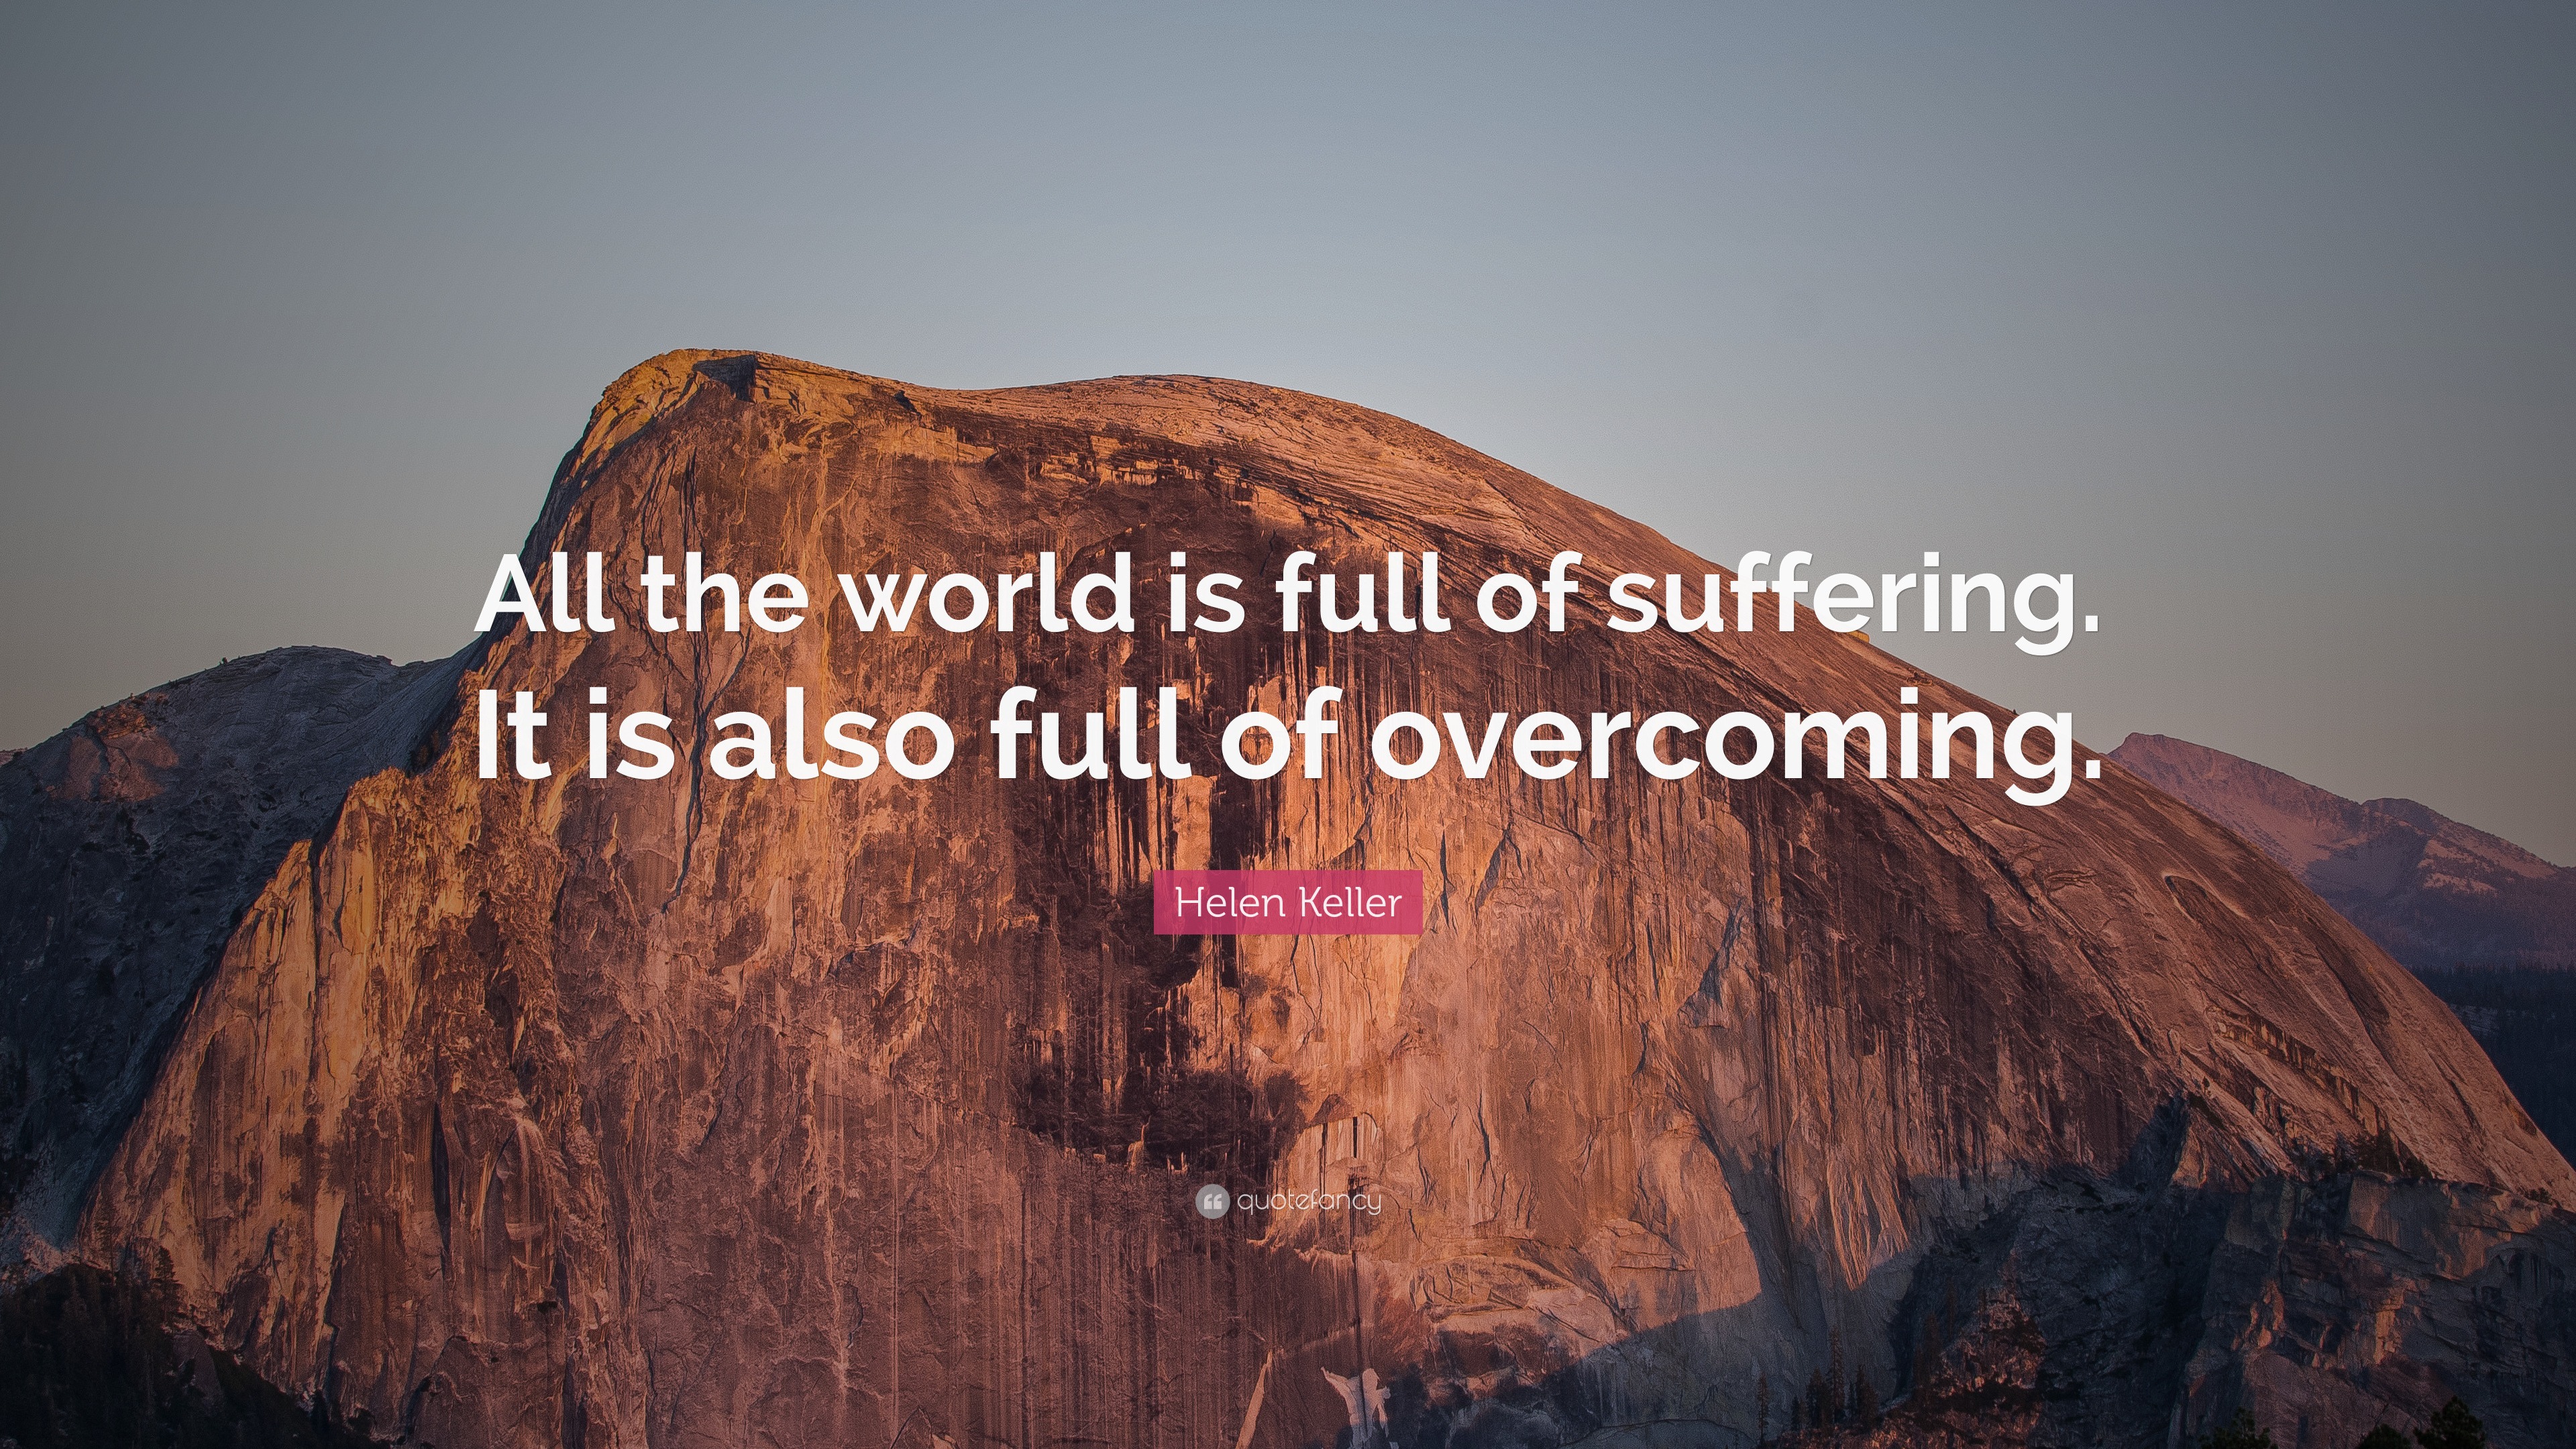 Helen Keller Quote: “All the world is full of suffering. It is also